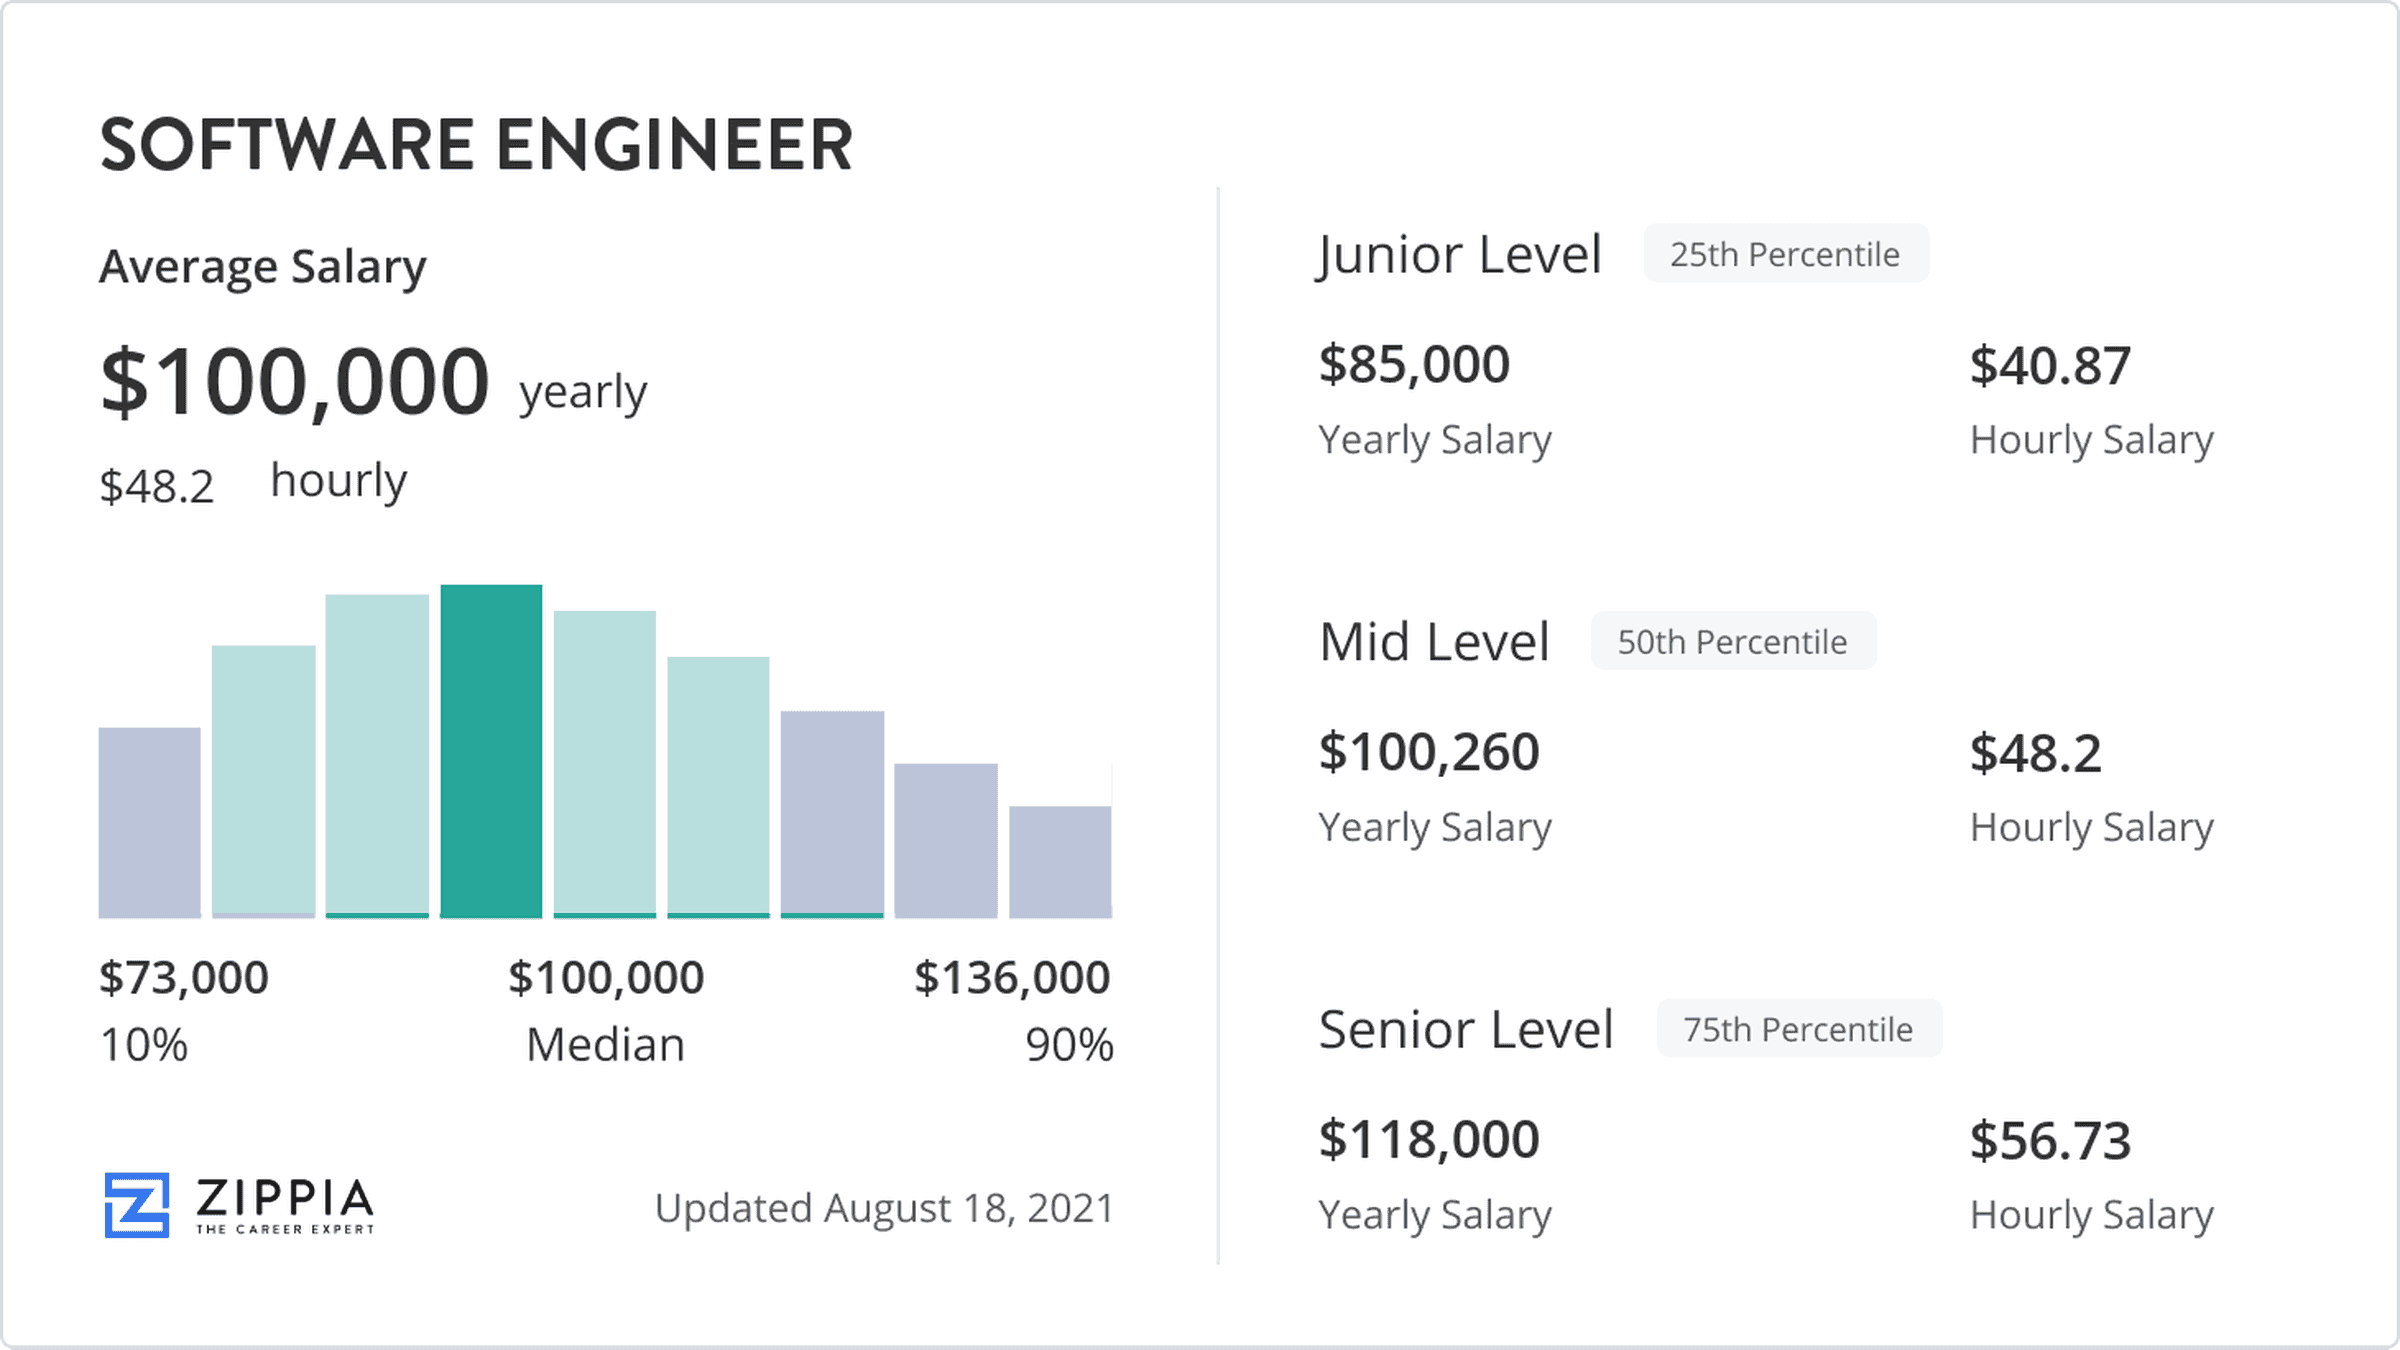 What is the average salary for software engineers